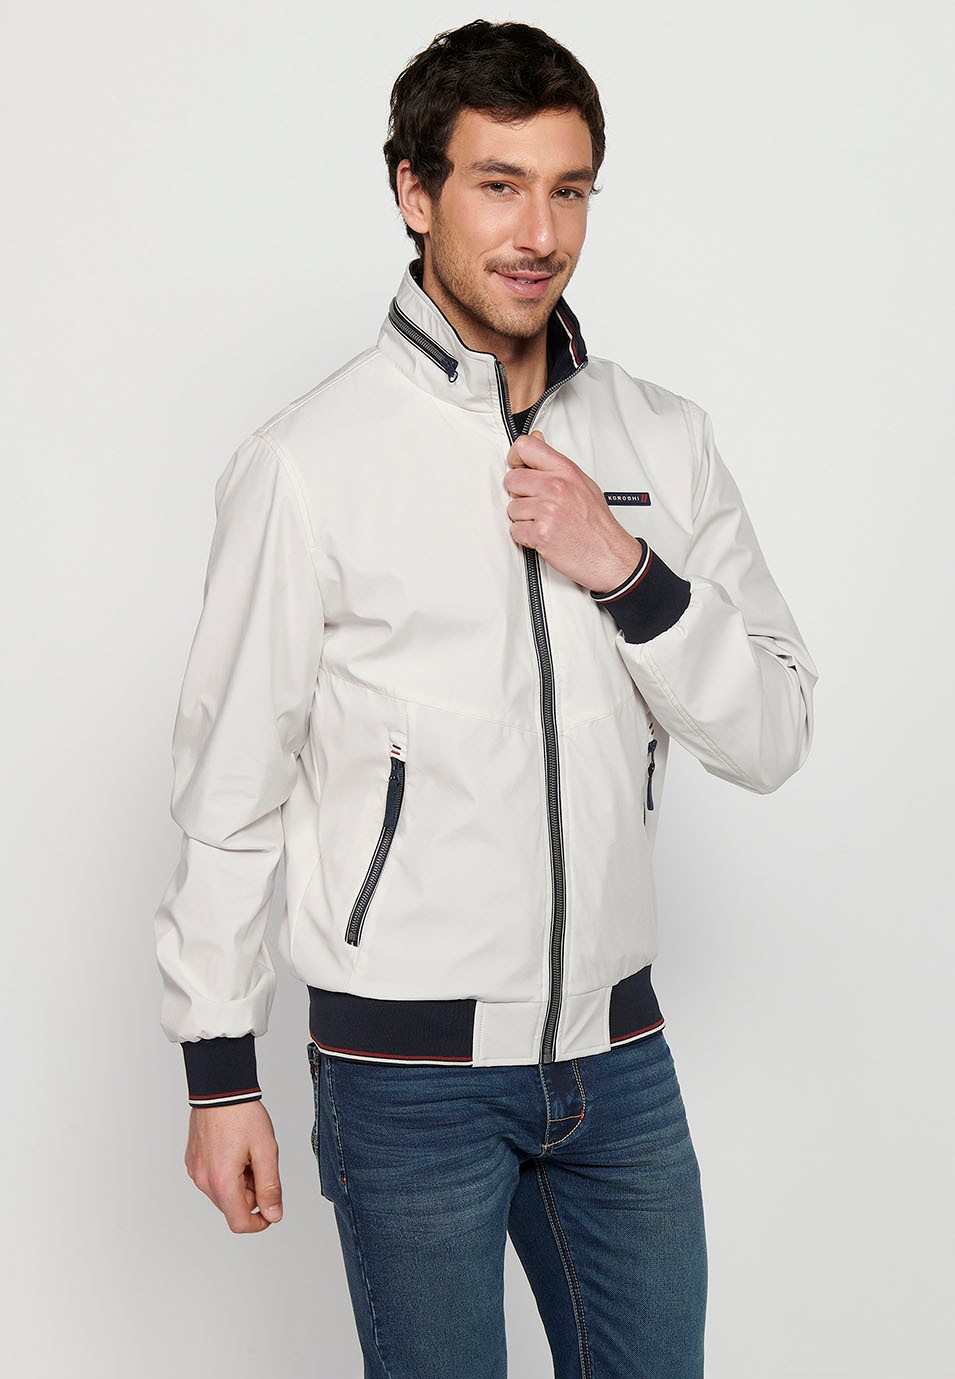 Long-sleeved high-neck jacket with front zipper closure and ribbed finishes with pockets, one inside in Gray for Men